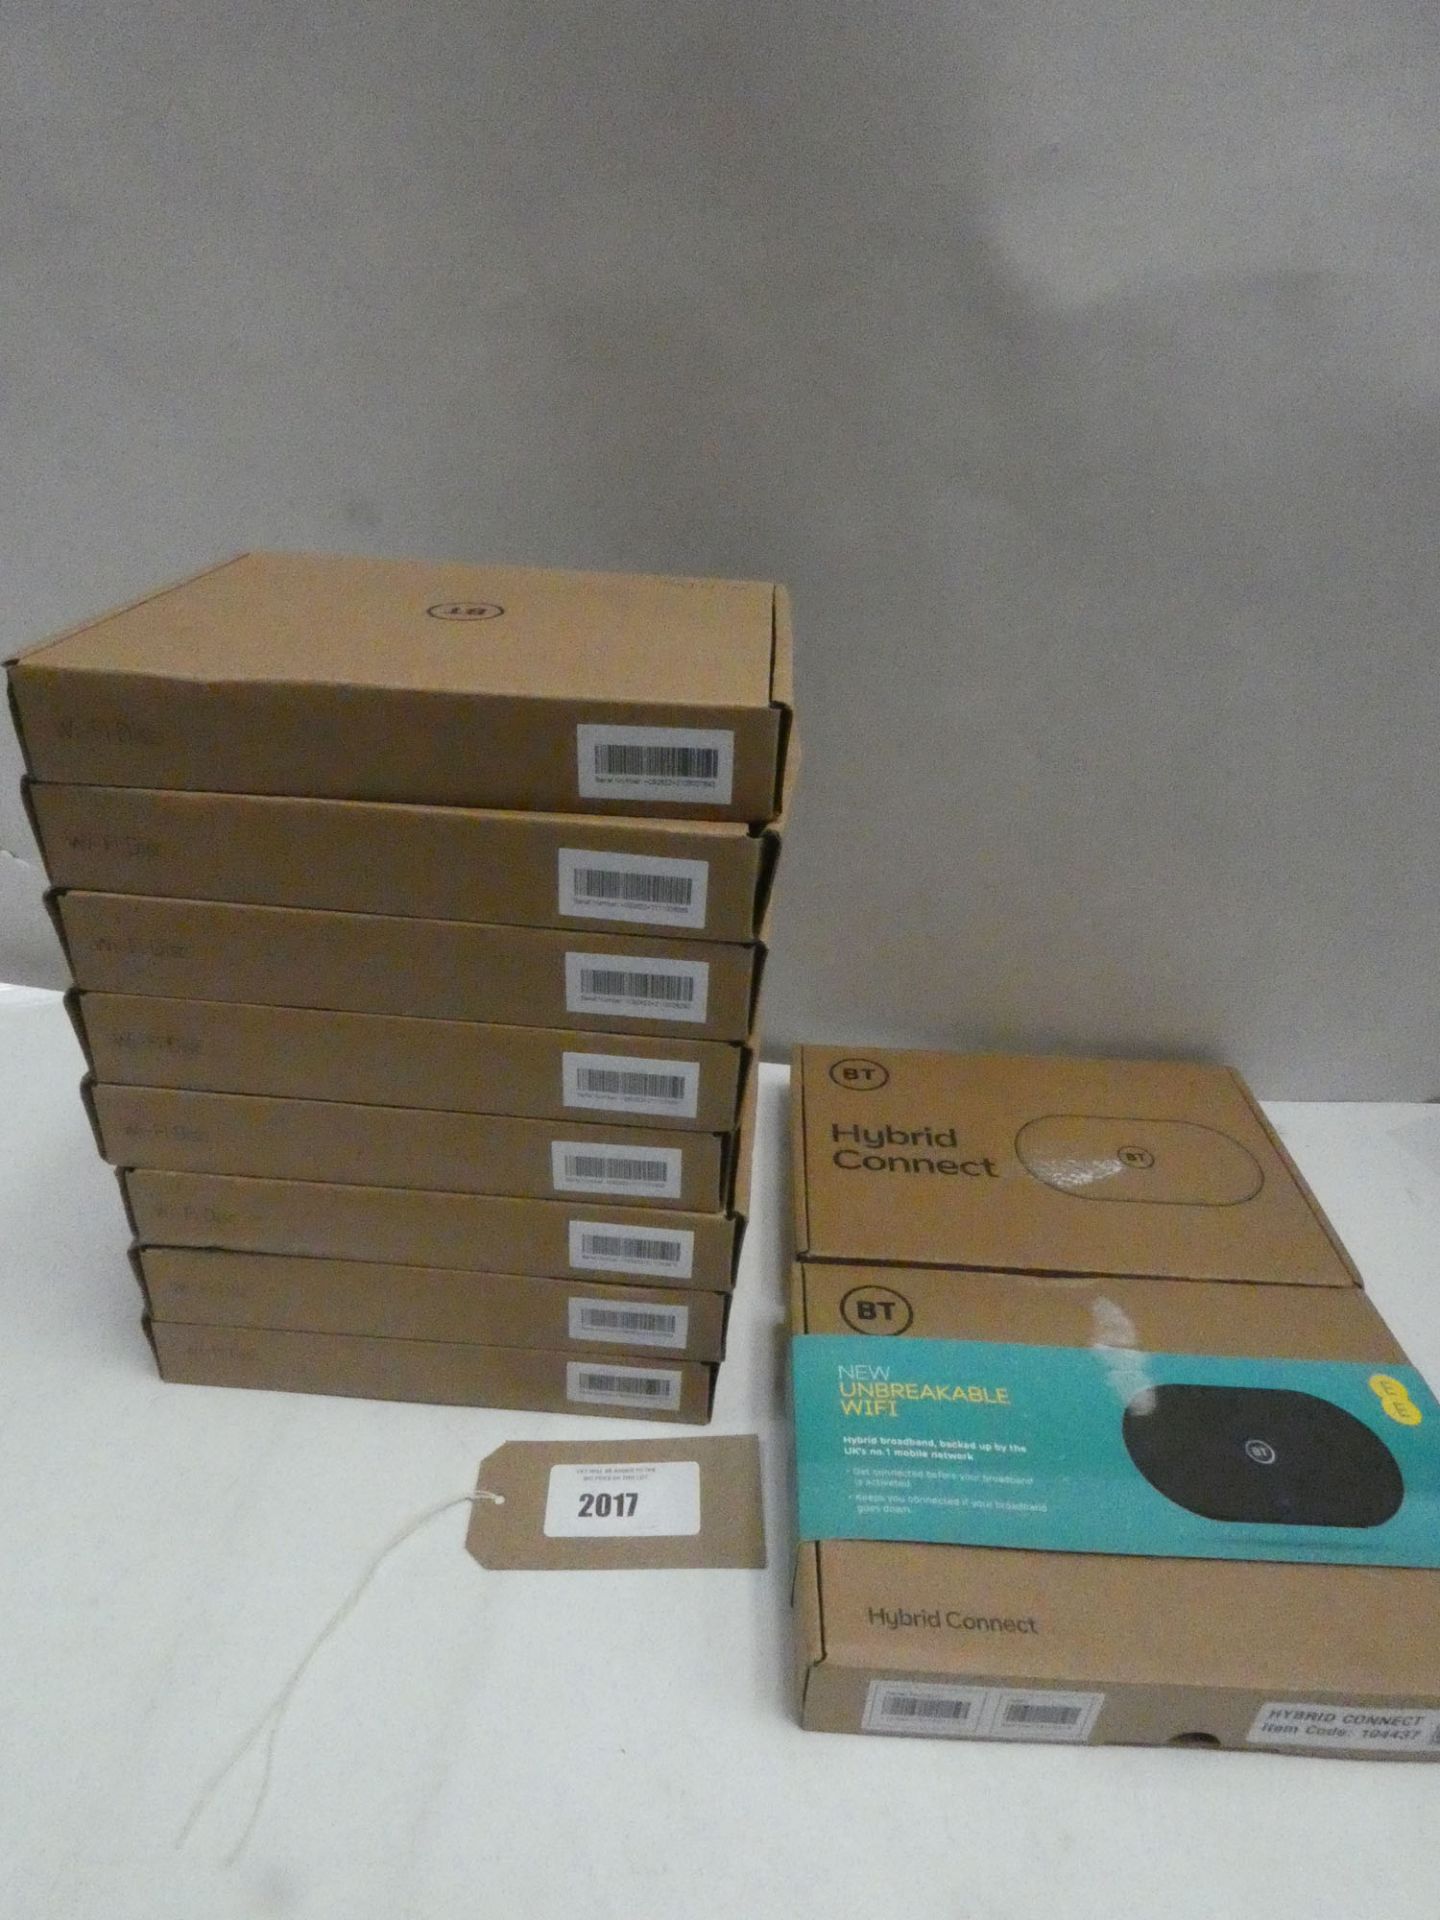 7x BT WiFi Discs and 2x BT Hybrid Connects